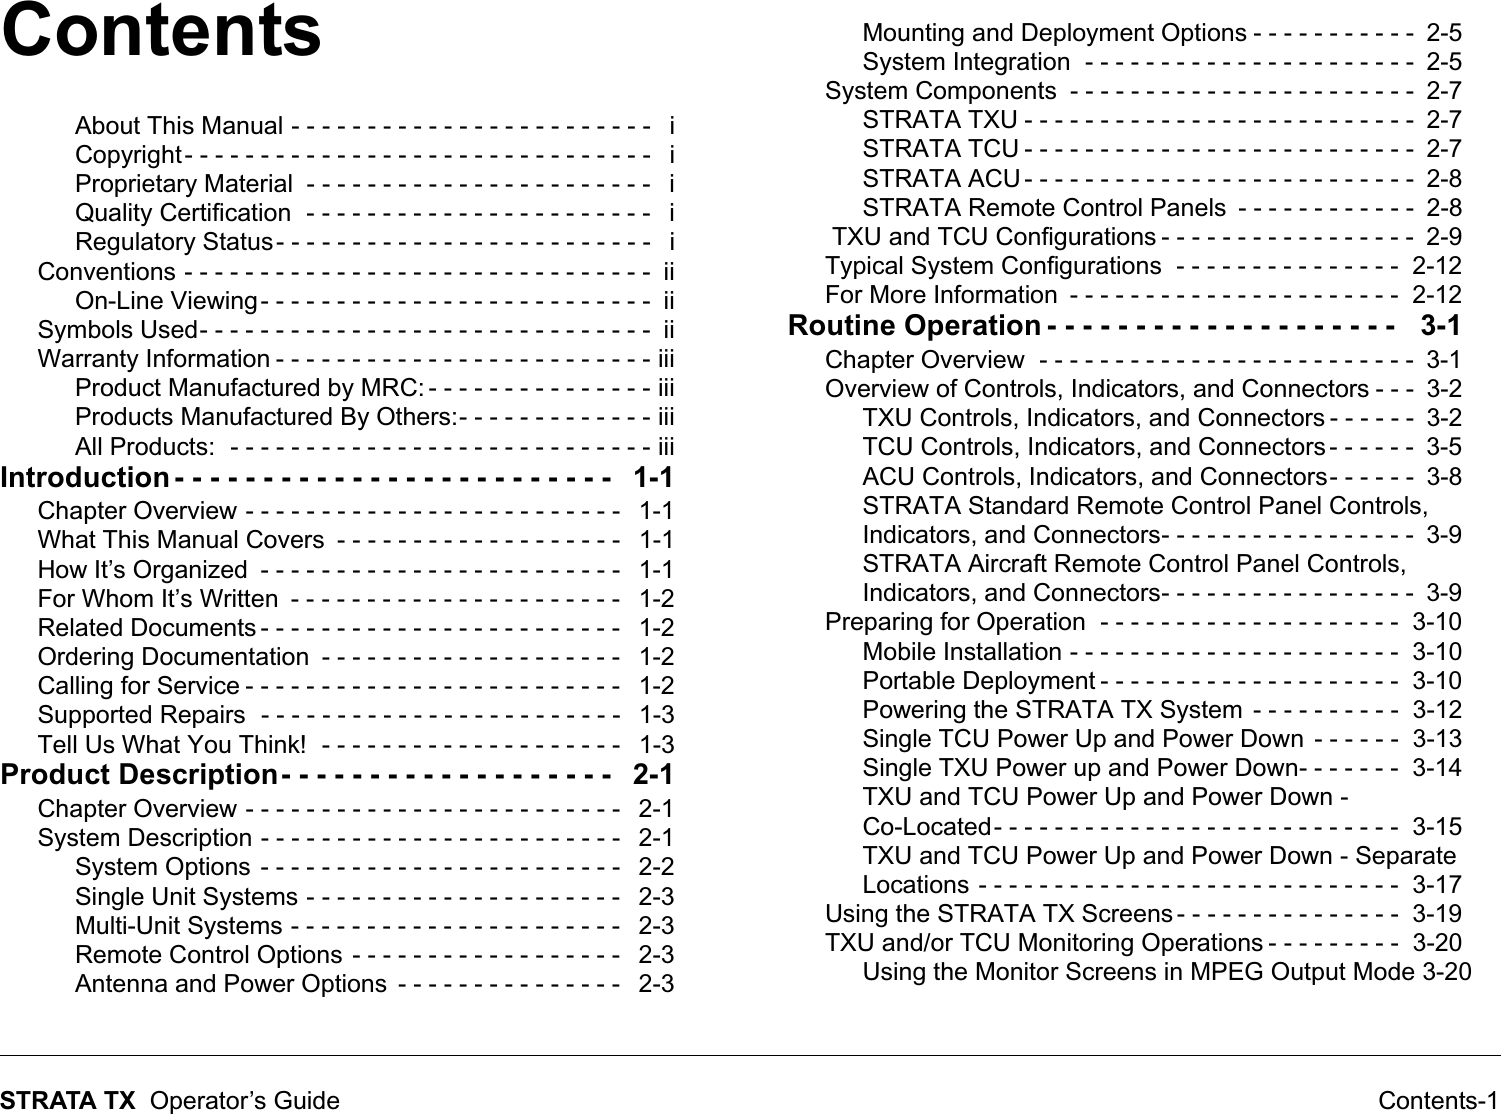 Contents Contents-1STRATA TX  Operator’s GuideAbout This Manual - - - - - - - - - - - - - - - - - - - - - - - -   iCopyright- - - - - - - - - - - - - - - - - - - - - - - - - - - - - - -   iProprietary Material  - - - - - - - - - - - - - - - - - - - - - - -   iQuality Certification  - - - - - - - - - - - - - - - - - - - - - - -   iRegulatory Status- - - - - - - - - - - - - - - - - - - - - - - - -   iConventions - - - - - - - - - - - - - - - - - - - - - - - - - - - - - - -  iiOn-Line Viewing- - - - - - - - - - - - - - - - - - - - - - - - - -  iiSymbols Used- - - - - - - - - - - - - - - - - - - - - - - - - - - - - -  iiWarranty Information - - - - - - - - - - - - - - - - - - - - - - - - - iiiProduct Manufactured by MRC: - - - - - - - - - - - - - - - iiiProducts Manufactured By Others:- - - - - - - - - - - - - iiiAll Products:  - - - - - - - - - - - - - - - - - - - - - - - - - - - - iiiIntroduction - - - - - - - - - - - - - - - - - - - - - - - - -   1-1Chapter Overview - - - - - - - - - - - - - - - - - - - - - - - - -   1-1What This Manual Covers  - - - - - - - - - - - - - - - - - - -   1-1How It’s Organized  - - - - - - - - - - - - - - - - - - - - - - - -   1-1For Whom It’s Written  - - - - - - - - - - - - - - - - - - - - - -   1-2Related Documents - - - - - - - - - - - - - - - - - - - - - - - -   1-2Ordering Documentation  - - - - - - - - - - - - - - - - - - - -   1-2Calling for Service - - - - - - - - - - - - - - - - - - - - - - - - -   1-2Supported Repairs  - - - - - - - - - - - - - - - - - - - - - - - -   1-3Tell Us What You Think!  - - - - - - - - - - - - - - - - - - - -   1-3Product Description- - - - - - - - - - - - - - - - - - -   2-1Chapter Overview - - - - - - - - - - - - - - - - - - - - - - - - -   2-1System Description - - - - - - - - - - - - - - - - - - - - - - - -   2-1System Options  - - - - - - - - - - - - - - - - - - - - - - - -   2-2Single Unit Systems - - - - - - - - - - - - - - - - - - - - -   2-3Multi-Unit Systems - - - - - - - - - - - - - - - - - - - - - -   2-3Remote Control Options - - - - - - - - - - - - - - - - - -   2-3Antenna and Power Options  - - - - - - - - - - - - - - -   2-3Mounting and Deployment Options - - - - - - - - - - -  2-5System Integration  - - - - - - - - - - - - - - - - - - - - - -  2-5System Components  - - - - - - - - - - - - - - - - - - - - - - -  2-7STRATA TXU - - - - - - - - - - - - - - - - - - - - - - - - - -  2-7STRATA TCU - - - - - - - - - - - - - - - - - - - - - - - - - -  2-7STRATA ACU - - - - - - - - - - - - - - - - - - - - - - - - - -  2-8STRATA Remote Control Panels  - - - - - - - - - - - -  2-8 TXU and TCU Configurations - - - - - - - - - - - - - - - - -  2-9Typical System Configurations  - - - - - - - - - - - - - - -  2-12For More Information  - - - - - - - - - - - - - - - - - - - - - -  2-12Routine Operation - - - - - - - - - - - - - - - - - - - -   3-1Chapter Overview  - - - - - - - - - - - - - - - - - - - - - - - - -  3-1Overview of Controls, Indicators, and Connectors - - -  3-2TXU Controls, Indicators, and Connectors - - - - - -  3-2TCU Controls, Indicators, and Connectors - - - - - -  3-5ACU Controls, Indicators, and Connectors- - - - - -  3-8STRATA Standard Remote Control Panel Controls, Indicators, and Connectors- - - - - - - - - - - - - - - - -  3-9STRATA Aircraft Remote Control Panel Controls, Indicators, and Connectors- - - - - - - - - - - - - - - - -  3-9Preparing for Operation  - - - - - - - - - - - - - - - - - - - -  3-10Mobile Installation - - - - - - - - - - - - - - - - - - - - - -  3-10Portable Deployment - - - - - - - - - - - - - - - - - - - -  3-10Powering the STRATA TX System  - - - - - - - - - -  3-12Single TCU Power Up and Power Down  - - - - - -  3-13Single TXU Power up and Power Down- - - - - - -  3-14TXU and TCU Power Up and Power Down - Co-Located- - - - - - - - - - - - - - - - - - - - - - - - - - -  3-15TXU and TCU Power Up and Power Down - Separate Locations - - - - - - - - - - - - - - - - - - - - - - - - - - - -  3-17Using the STRATA TX Screens - - - - - - - - - - - - - - -  3-19TXU and/or TCU Monitoring Operations - - - - - - - - -  3-20Using the Monitor Screens in MPEG Output Mode 3-20